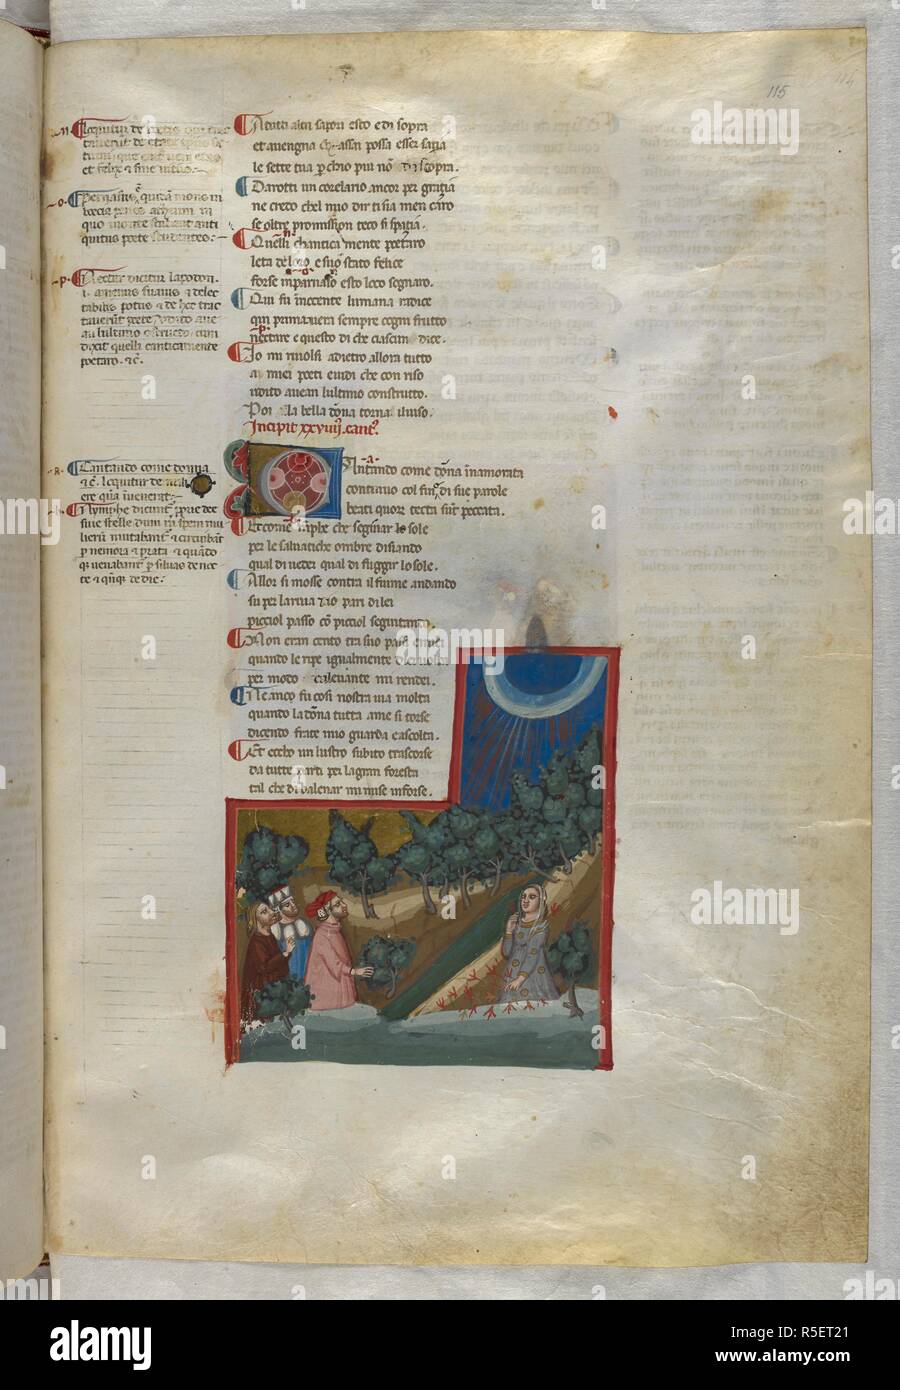 Purgatorio: They see a light shining in the sky. Dante Alighieri, Divina Commedia ( The Divine Comedy ), with a commentary in Latin. 1st half of the 14th century. Source: Egerton 943, f.115. Language: Italian, Latin. Stock Photo